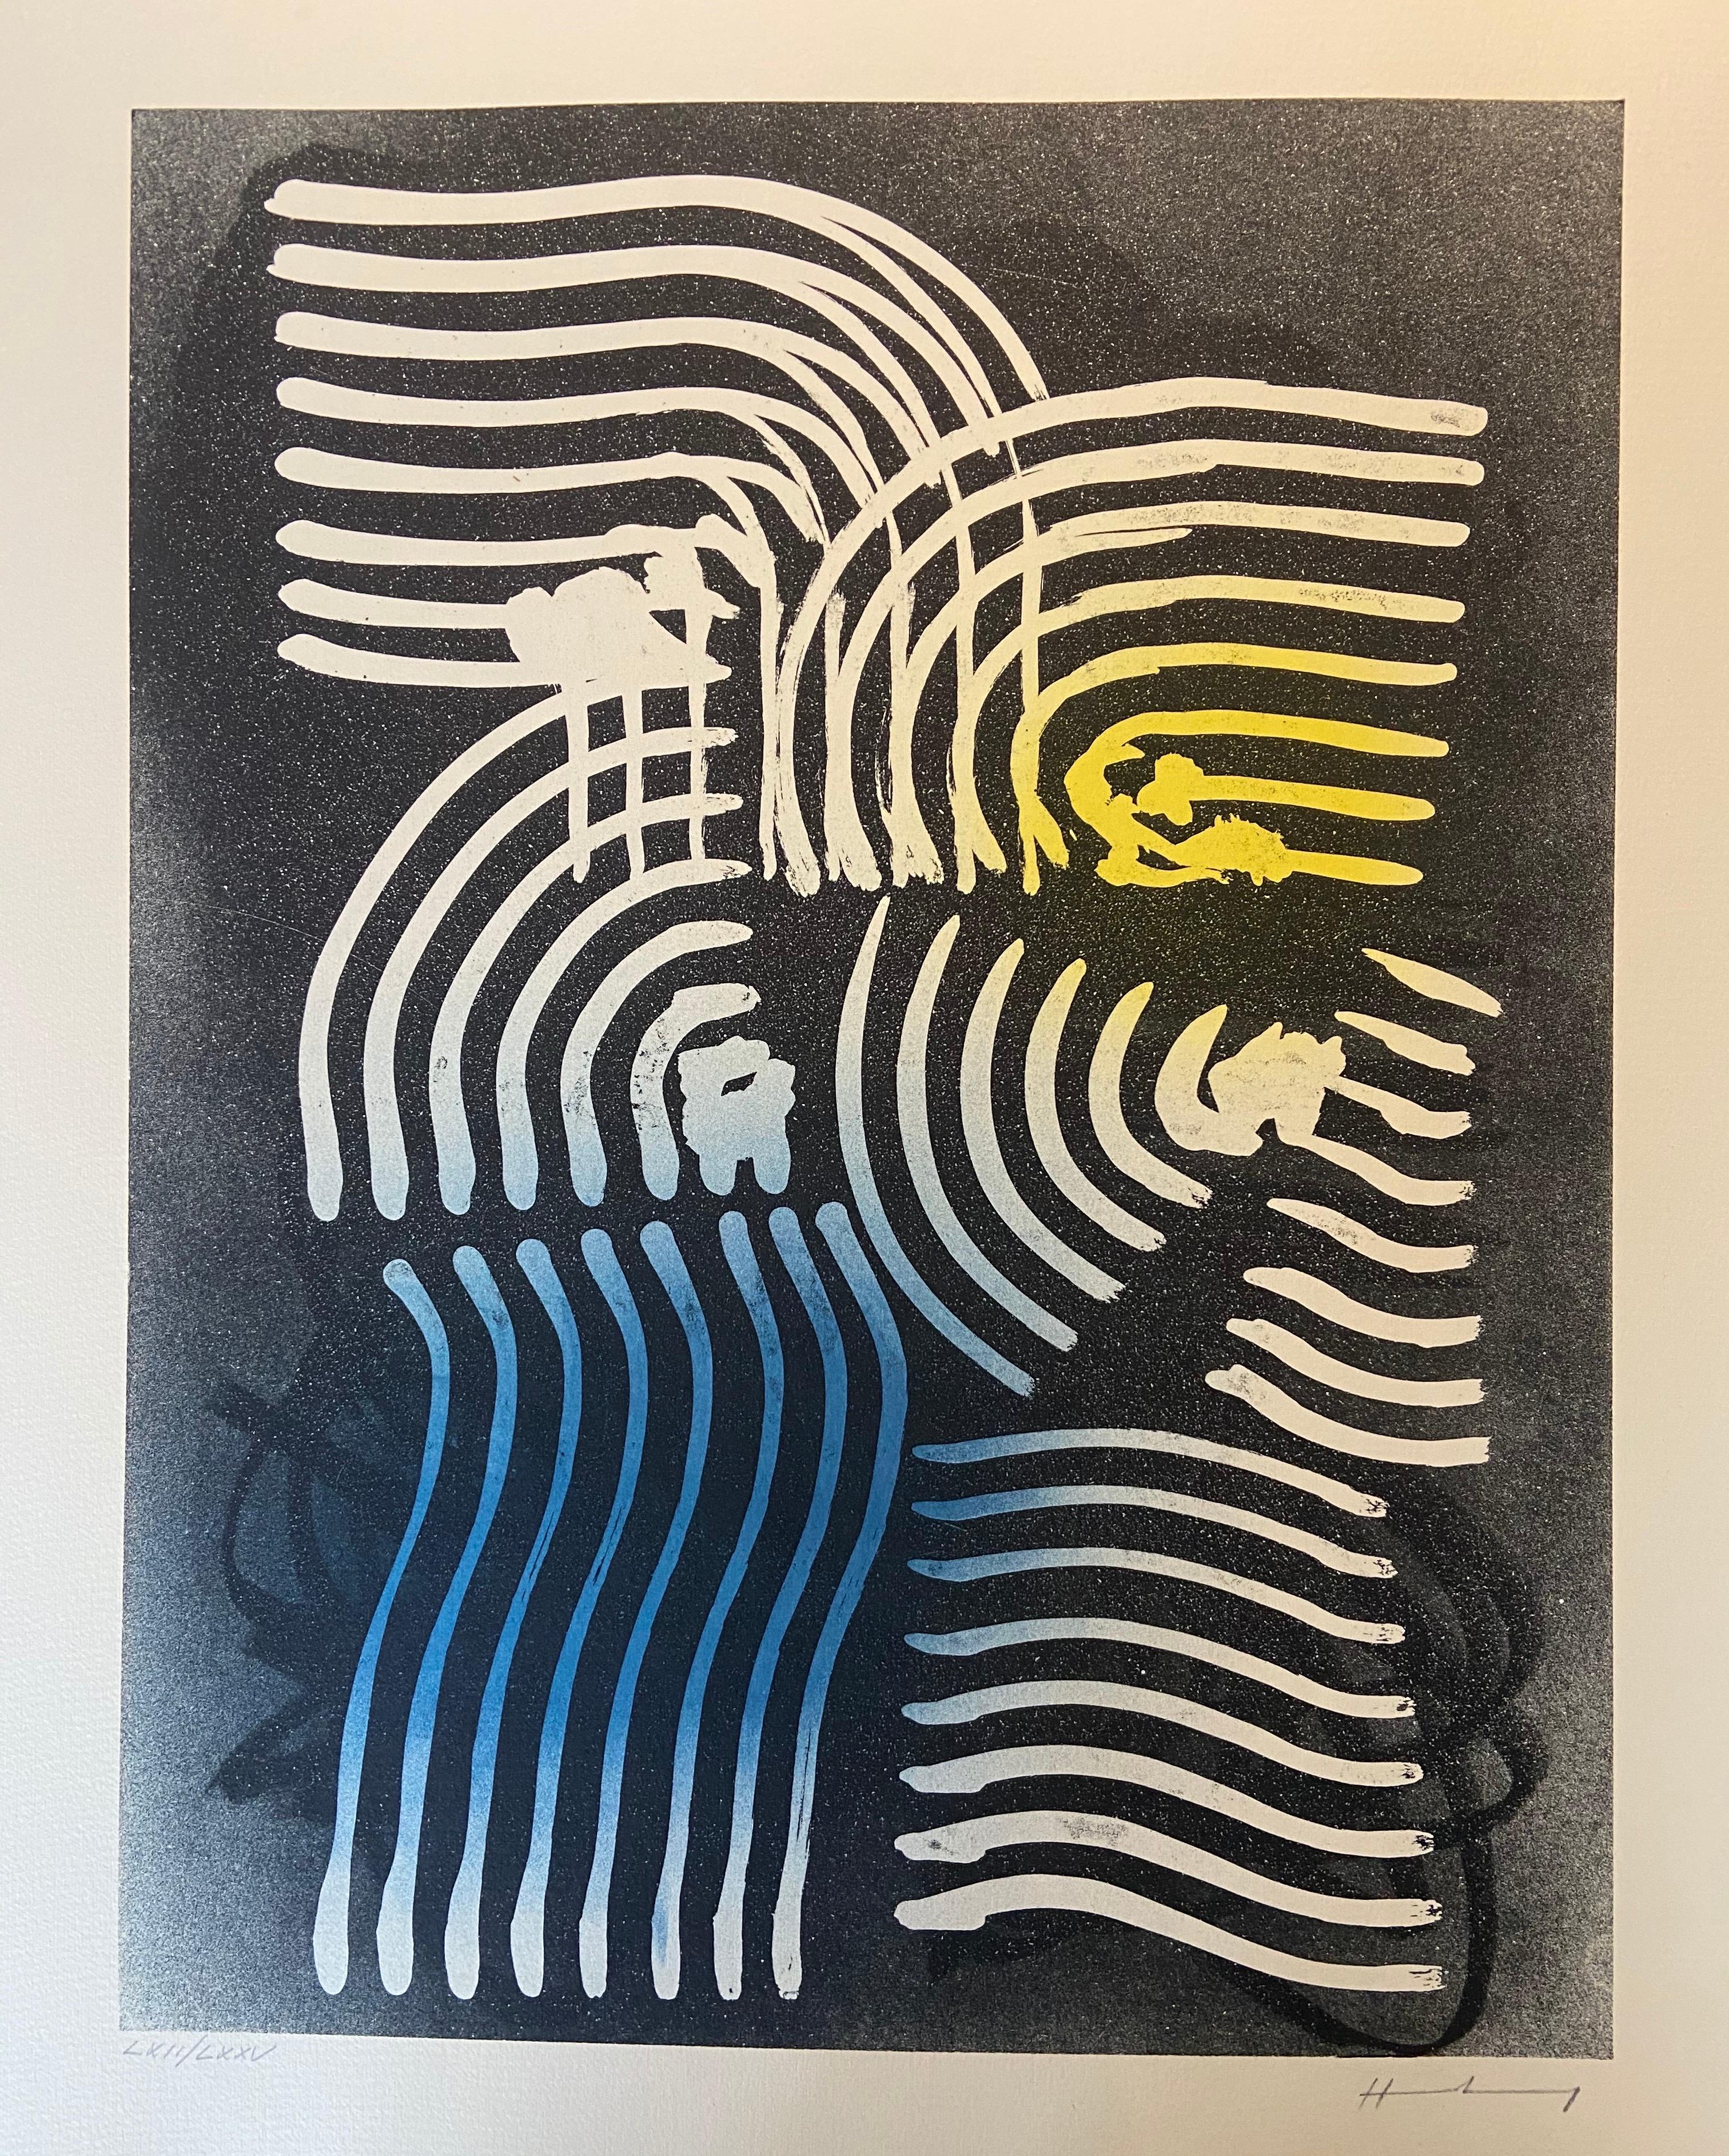 Hans Hartung - Lithograph Farandoles XVIII
Original signed and numbered in pencil
Edition of 75 copies on Guarro paper. 
Size: 86.5 cm x 59.5 cm
Dimensions of the work: 38 x 50
Edited and printed by Poligrafa, Barcelona. 1971 
Perfect condition
1600